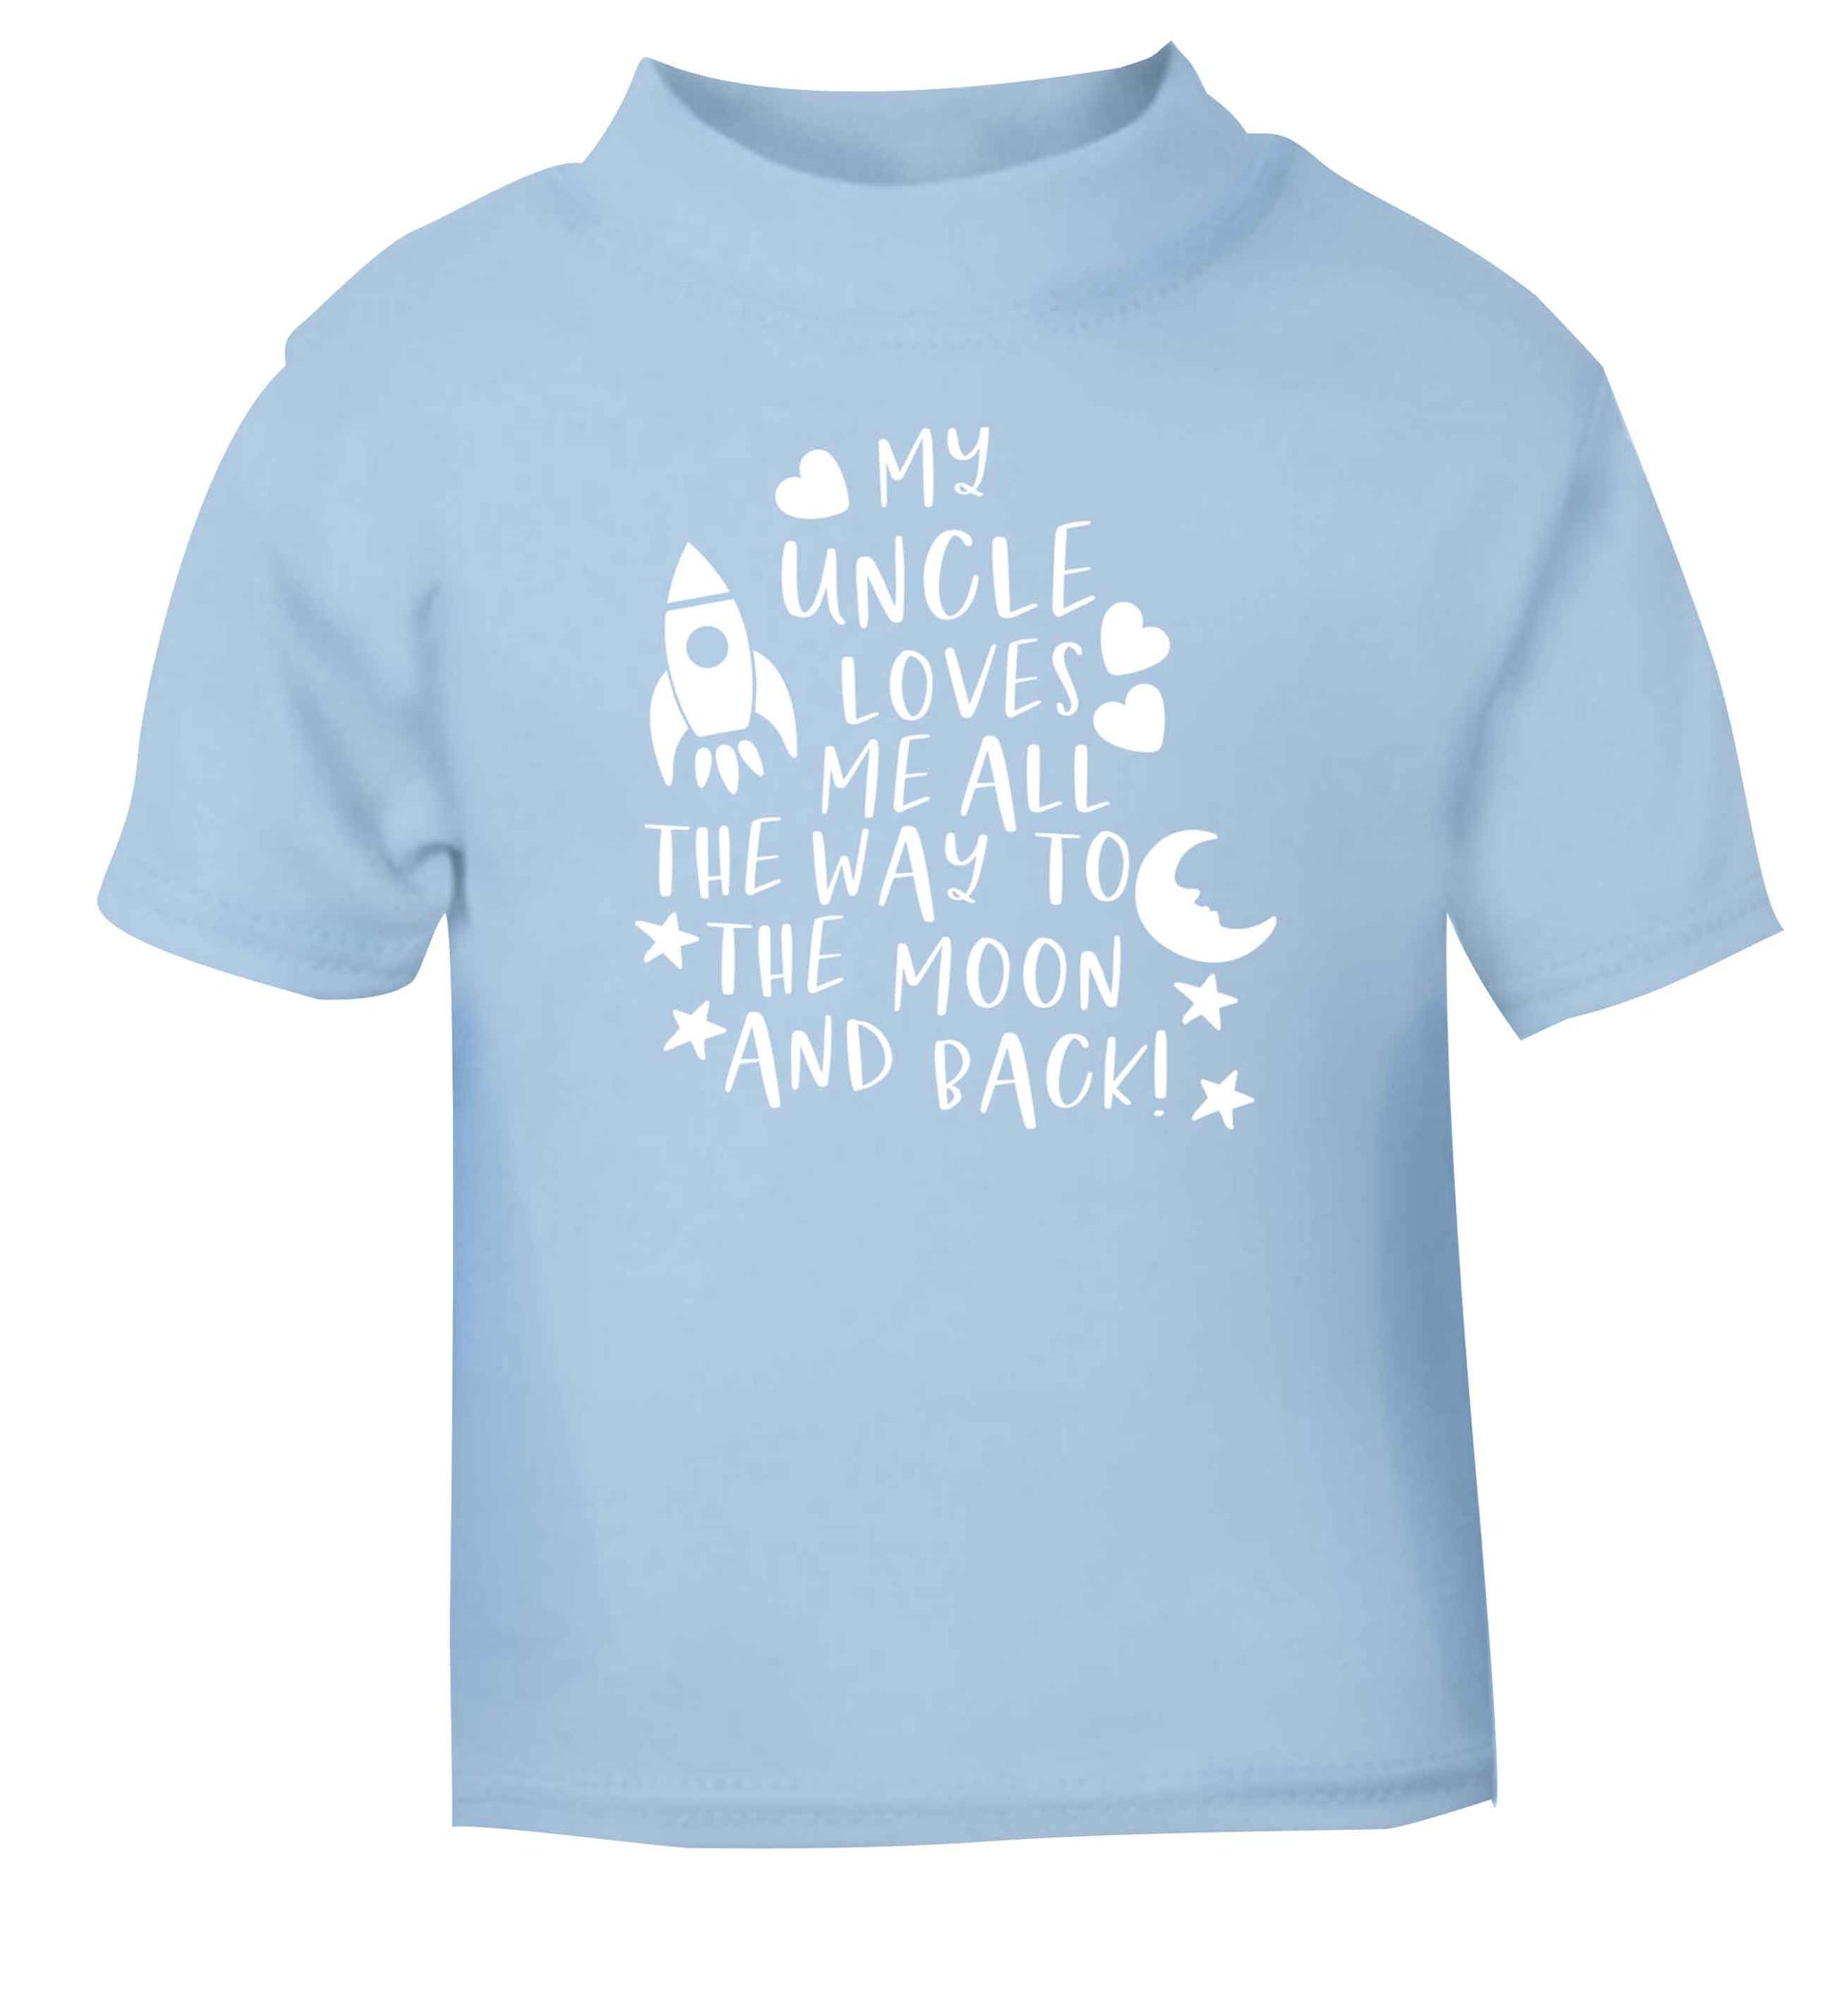 My uncle loves me all the way to the moon and back light blue Baby Toddler Tshirt 2 Years